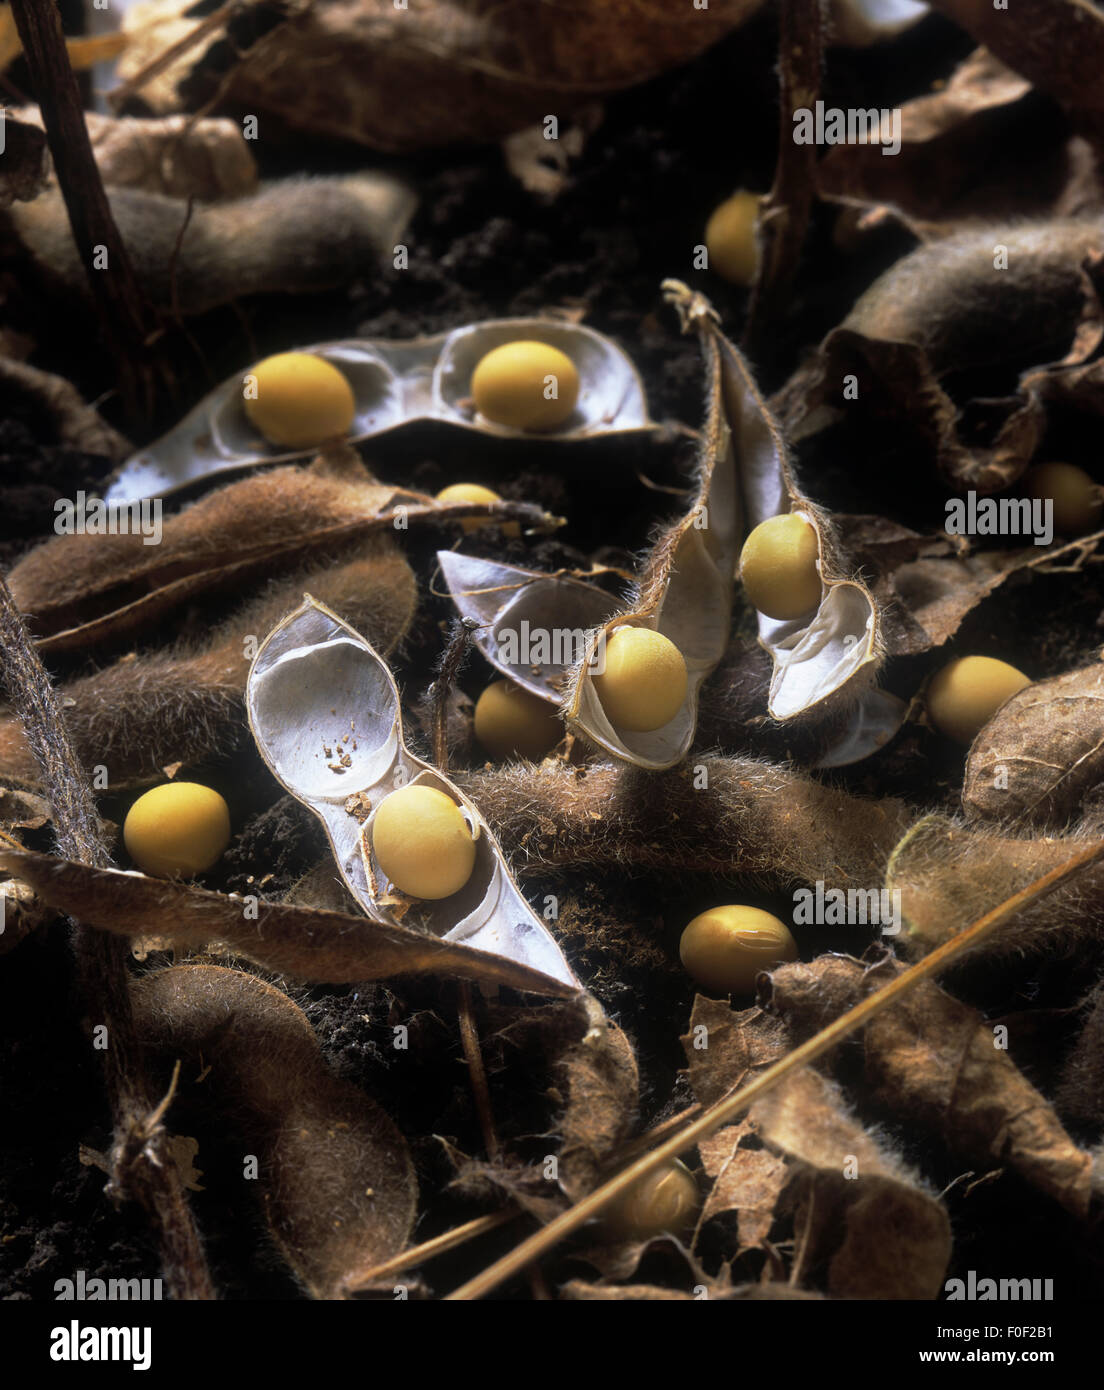 Close up of harvested soya beans and their pods. Stock Photo